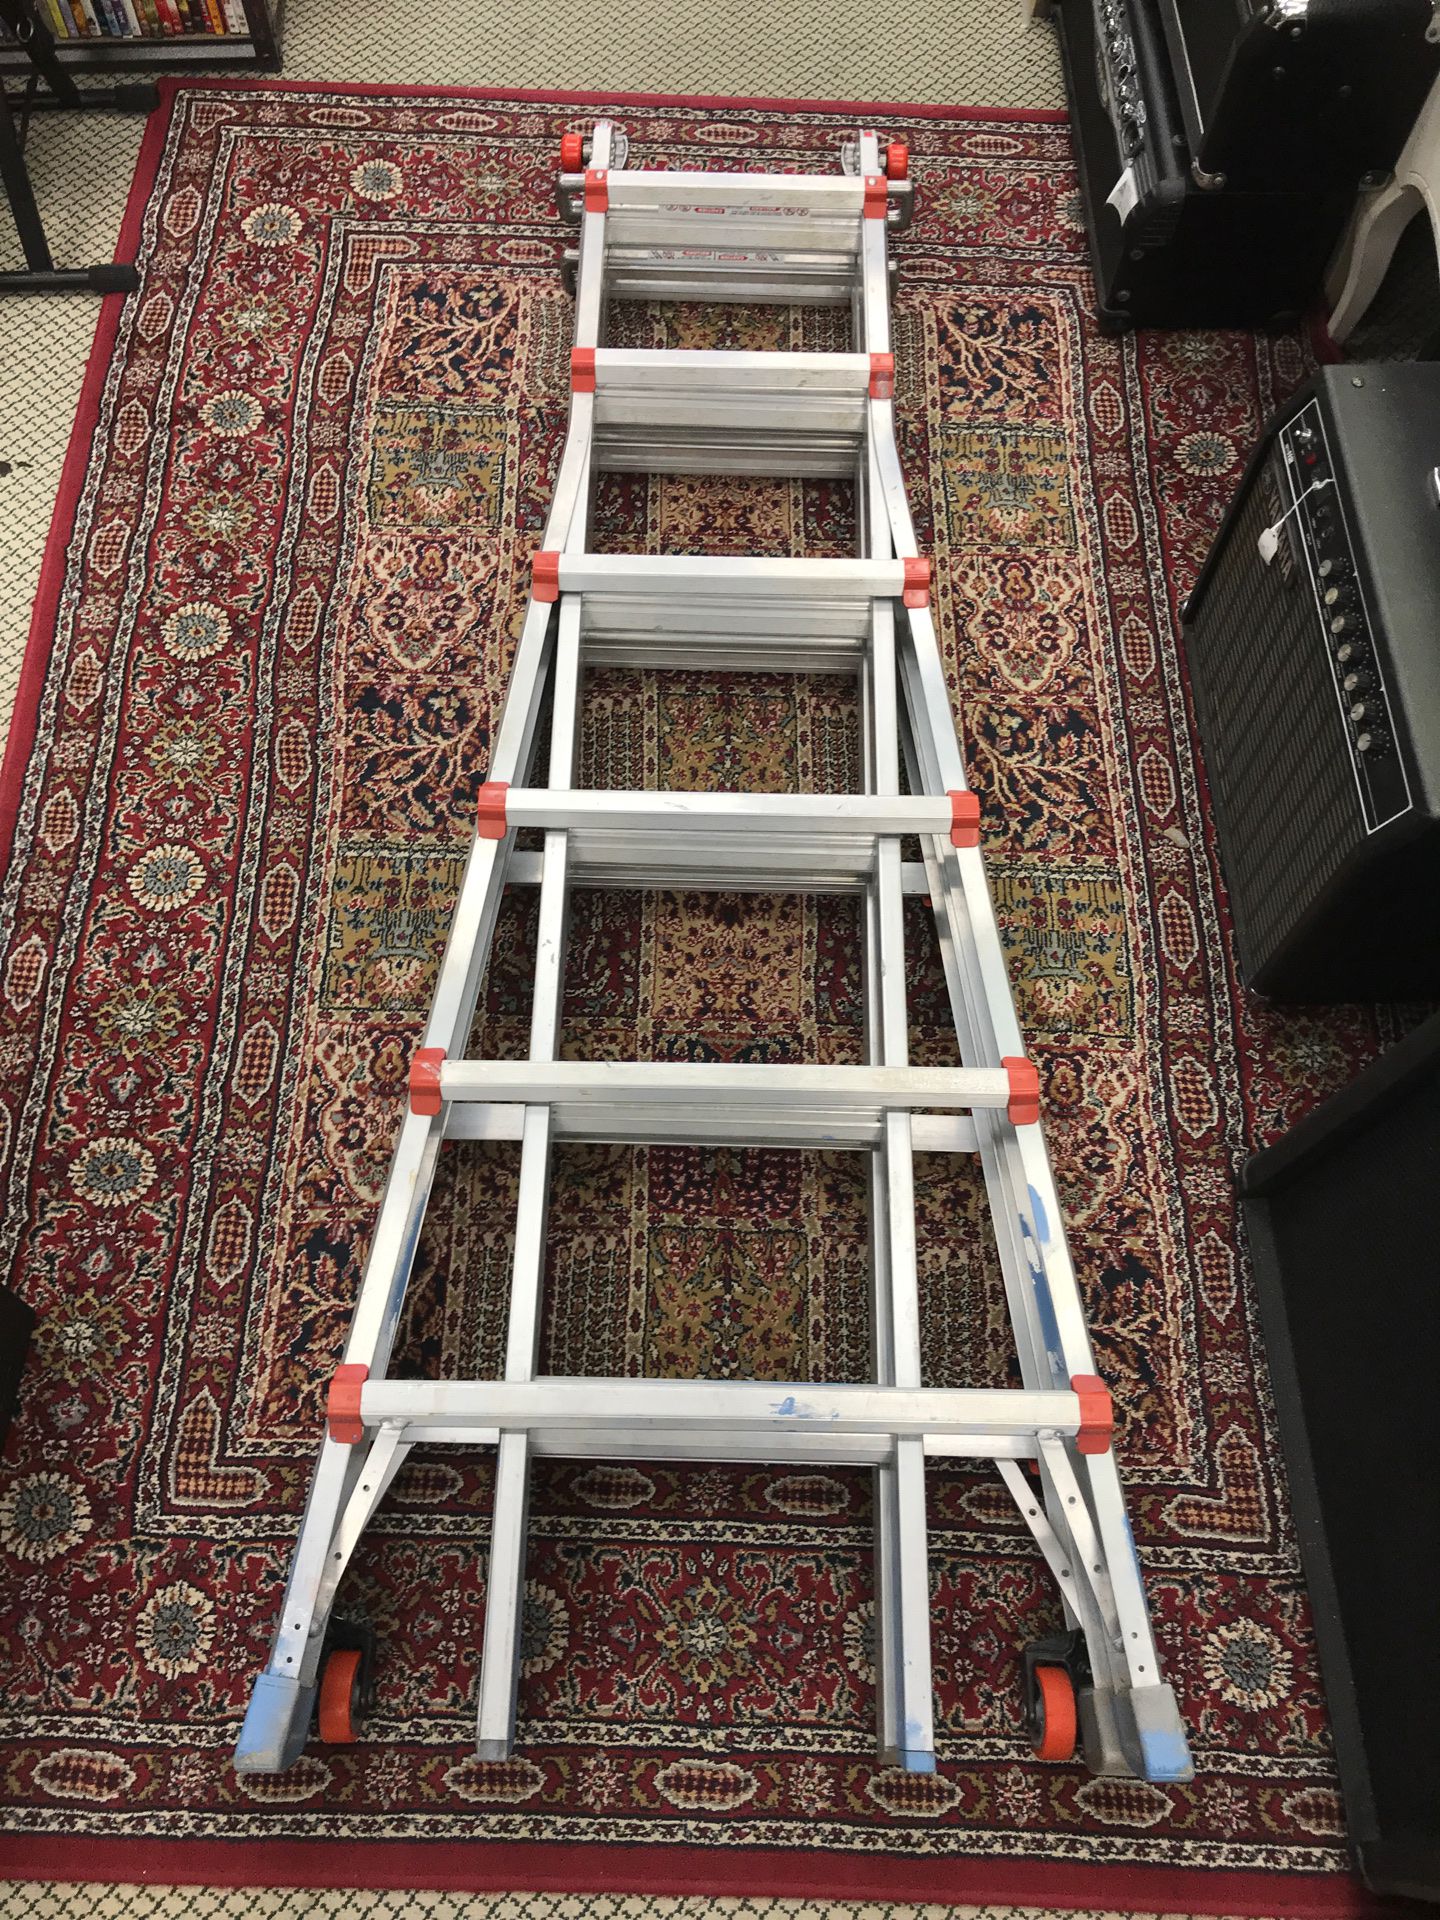 Little Giant Ladder Systems Type 1A M26 Model 10126 Extendable Ladder